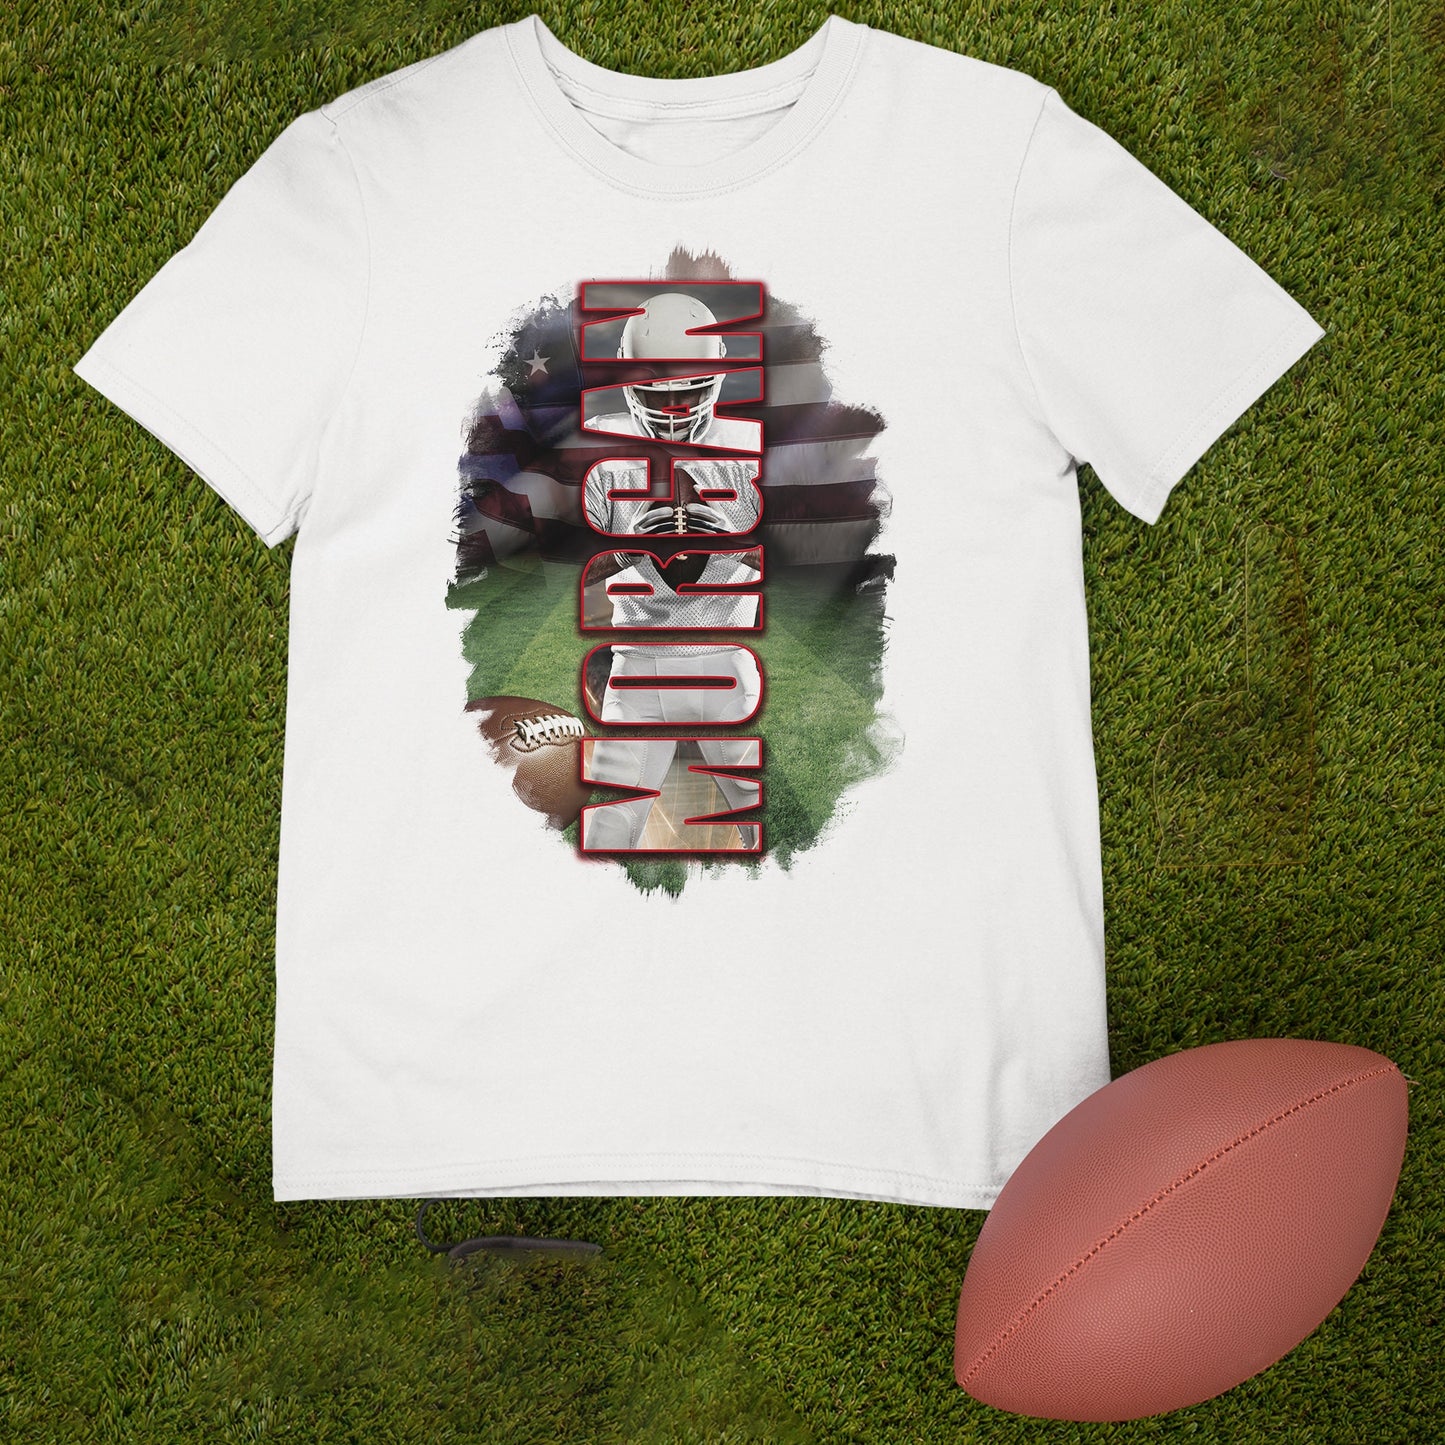 Personalized Football Picture T-Shirt for Game Day, Custom Photo Shirt, Senior Gift, Football Mom, Dad, Sister, Aunt and Brother, up to 5XL